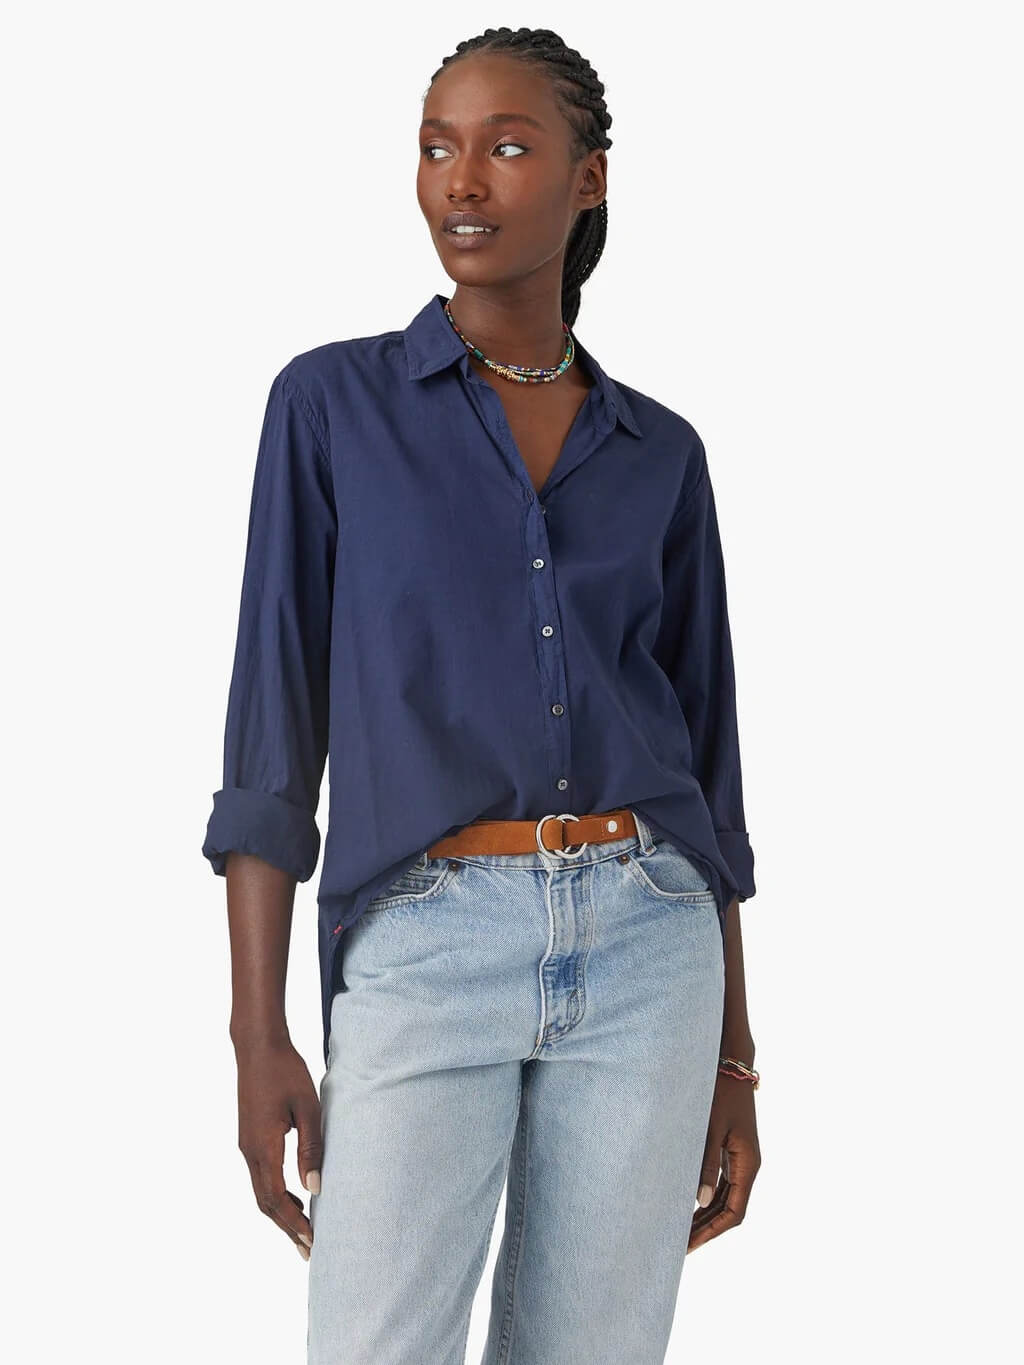 Xirena Beau Oversized Shirt in Navy Blue from The New Trend